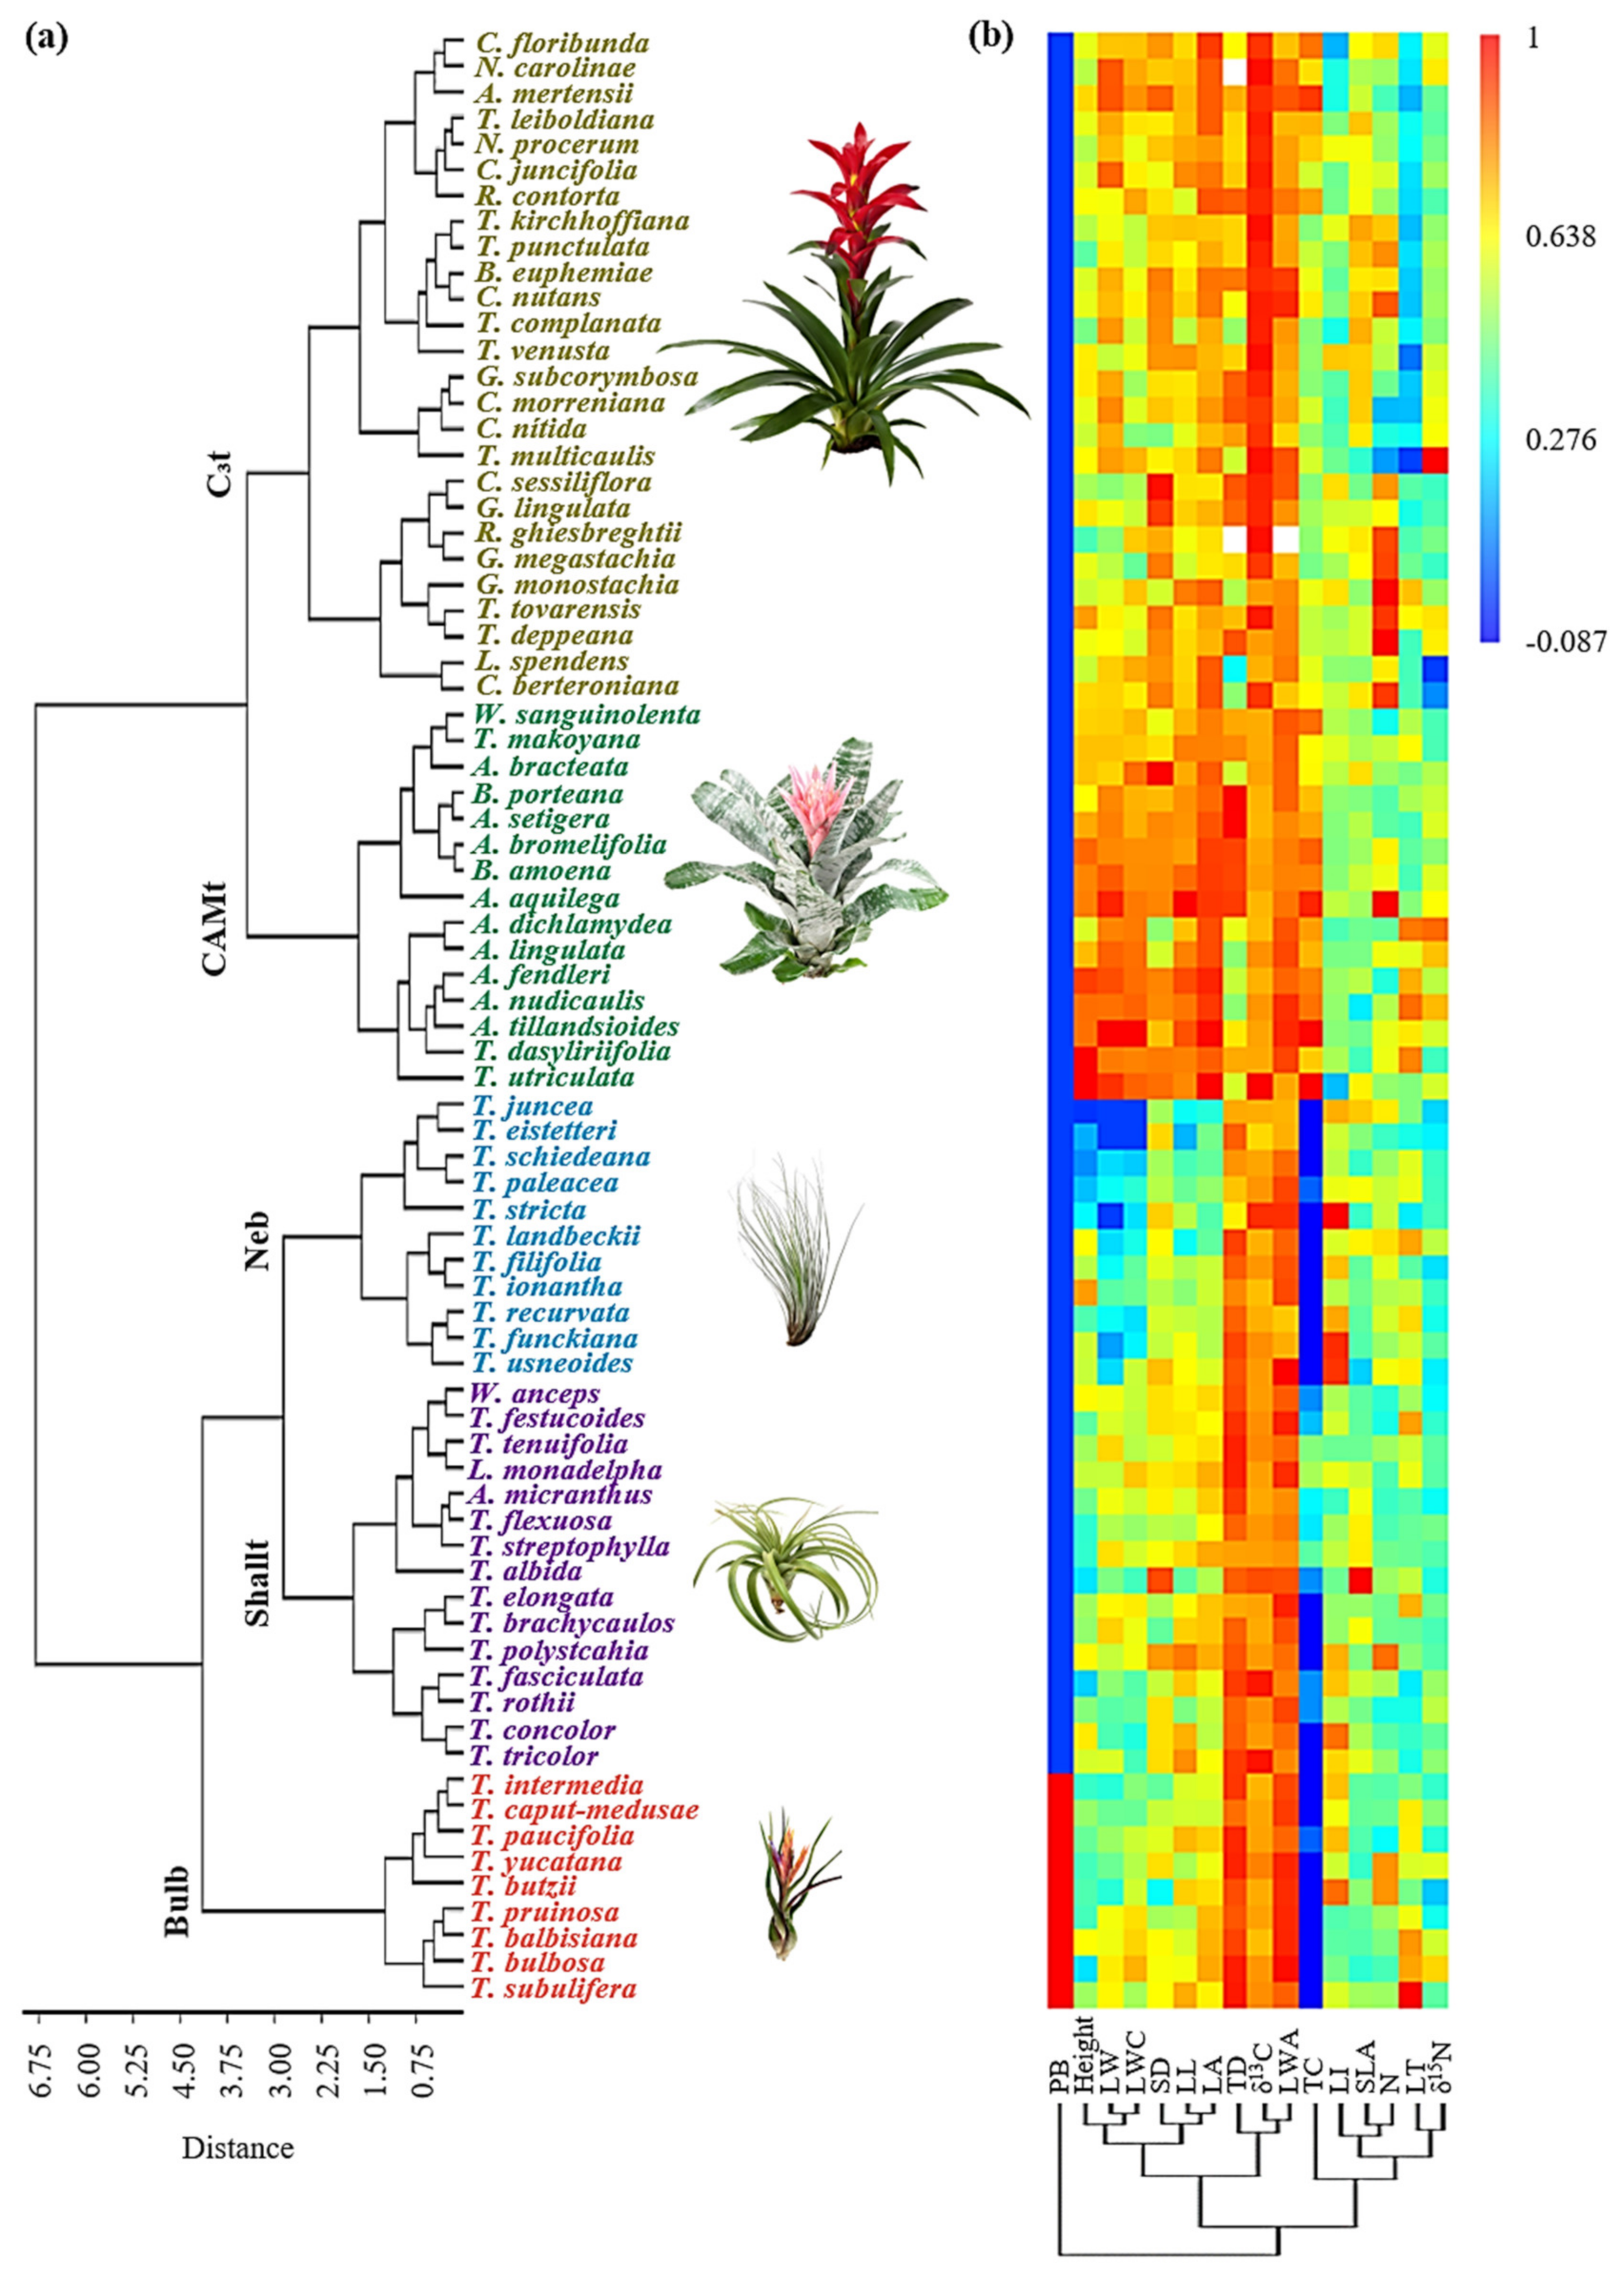 Phylogenetic diversity and the structure of host-epiphyte interactions